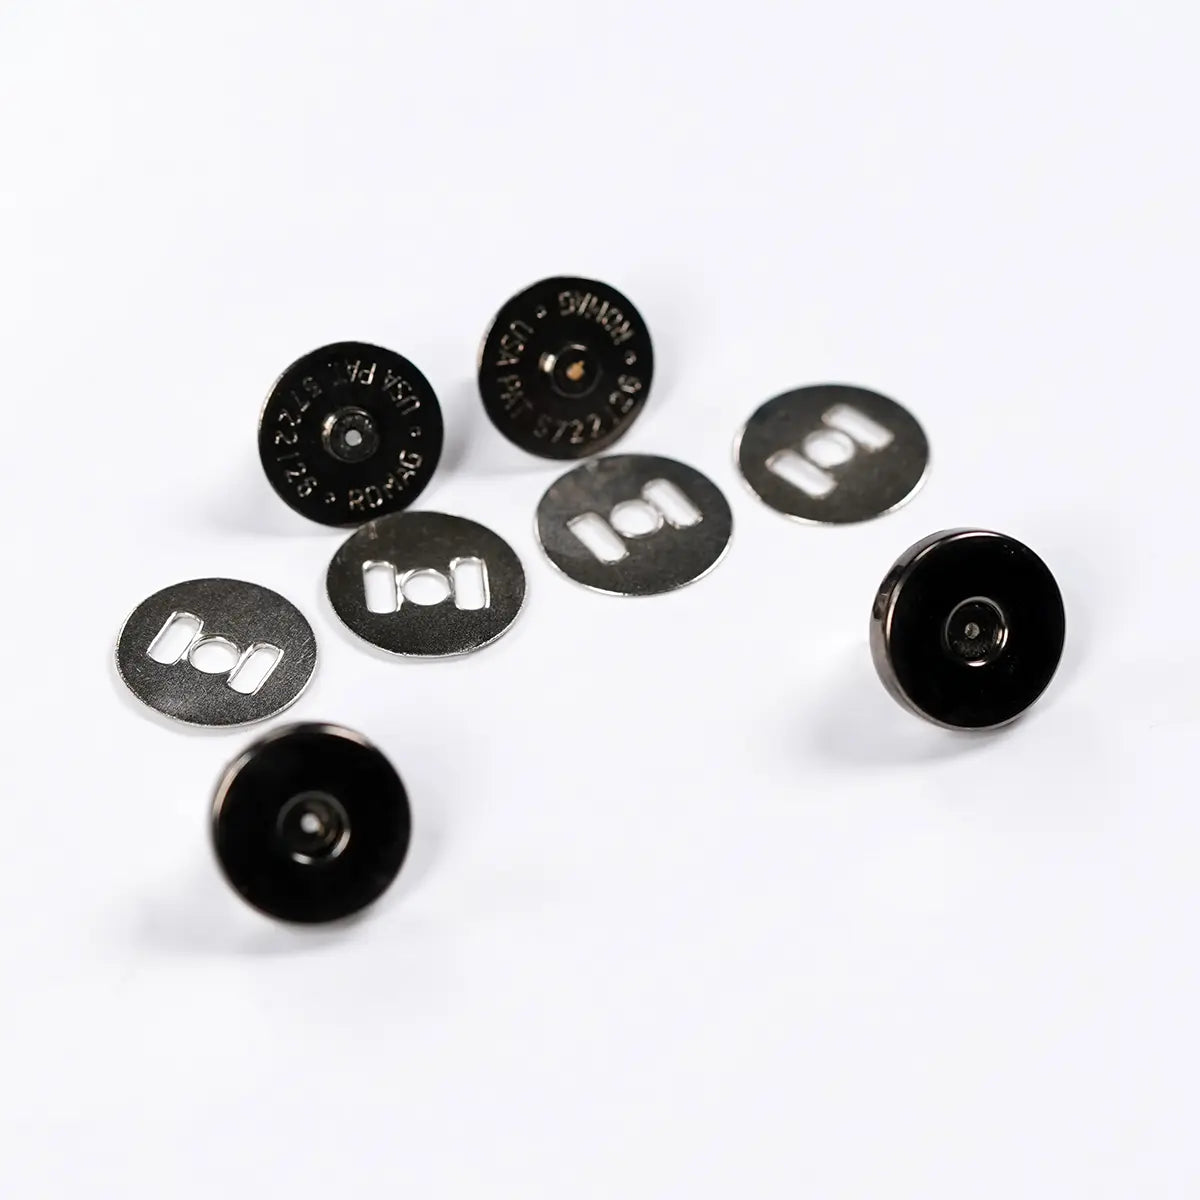 14mm Round Magnetic Snap 2 Pack - Gunmetal